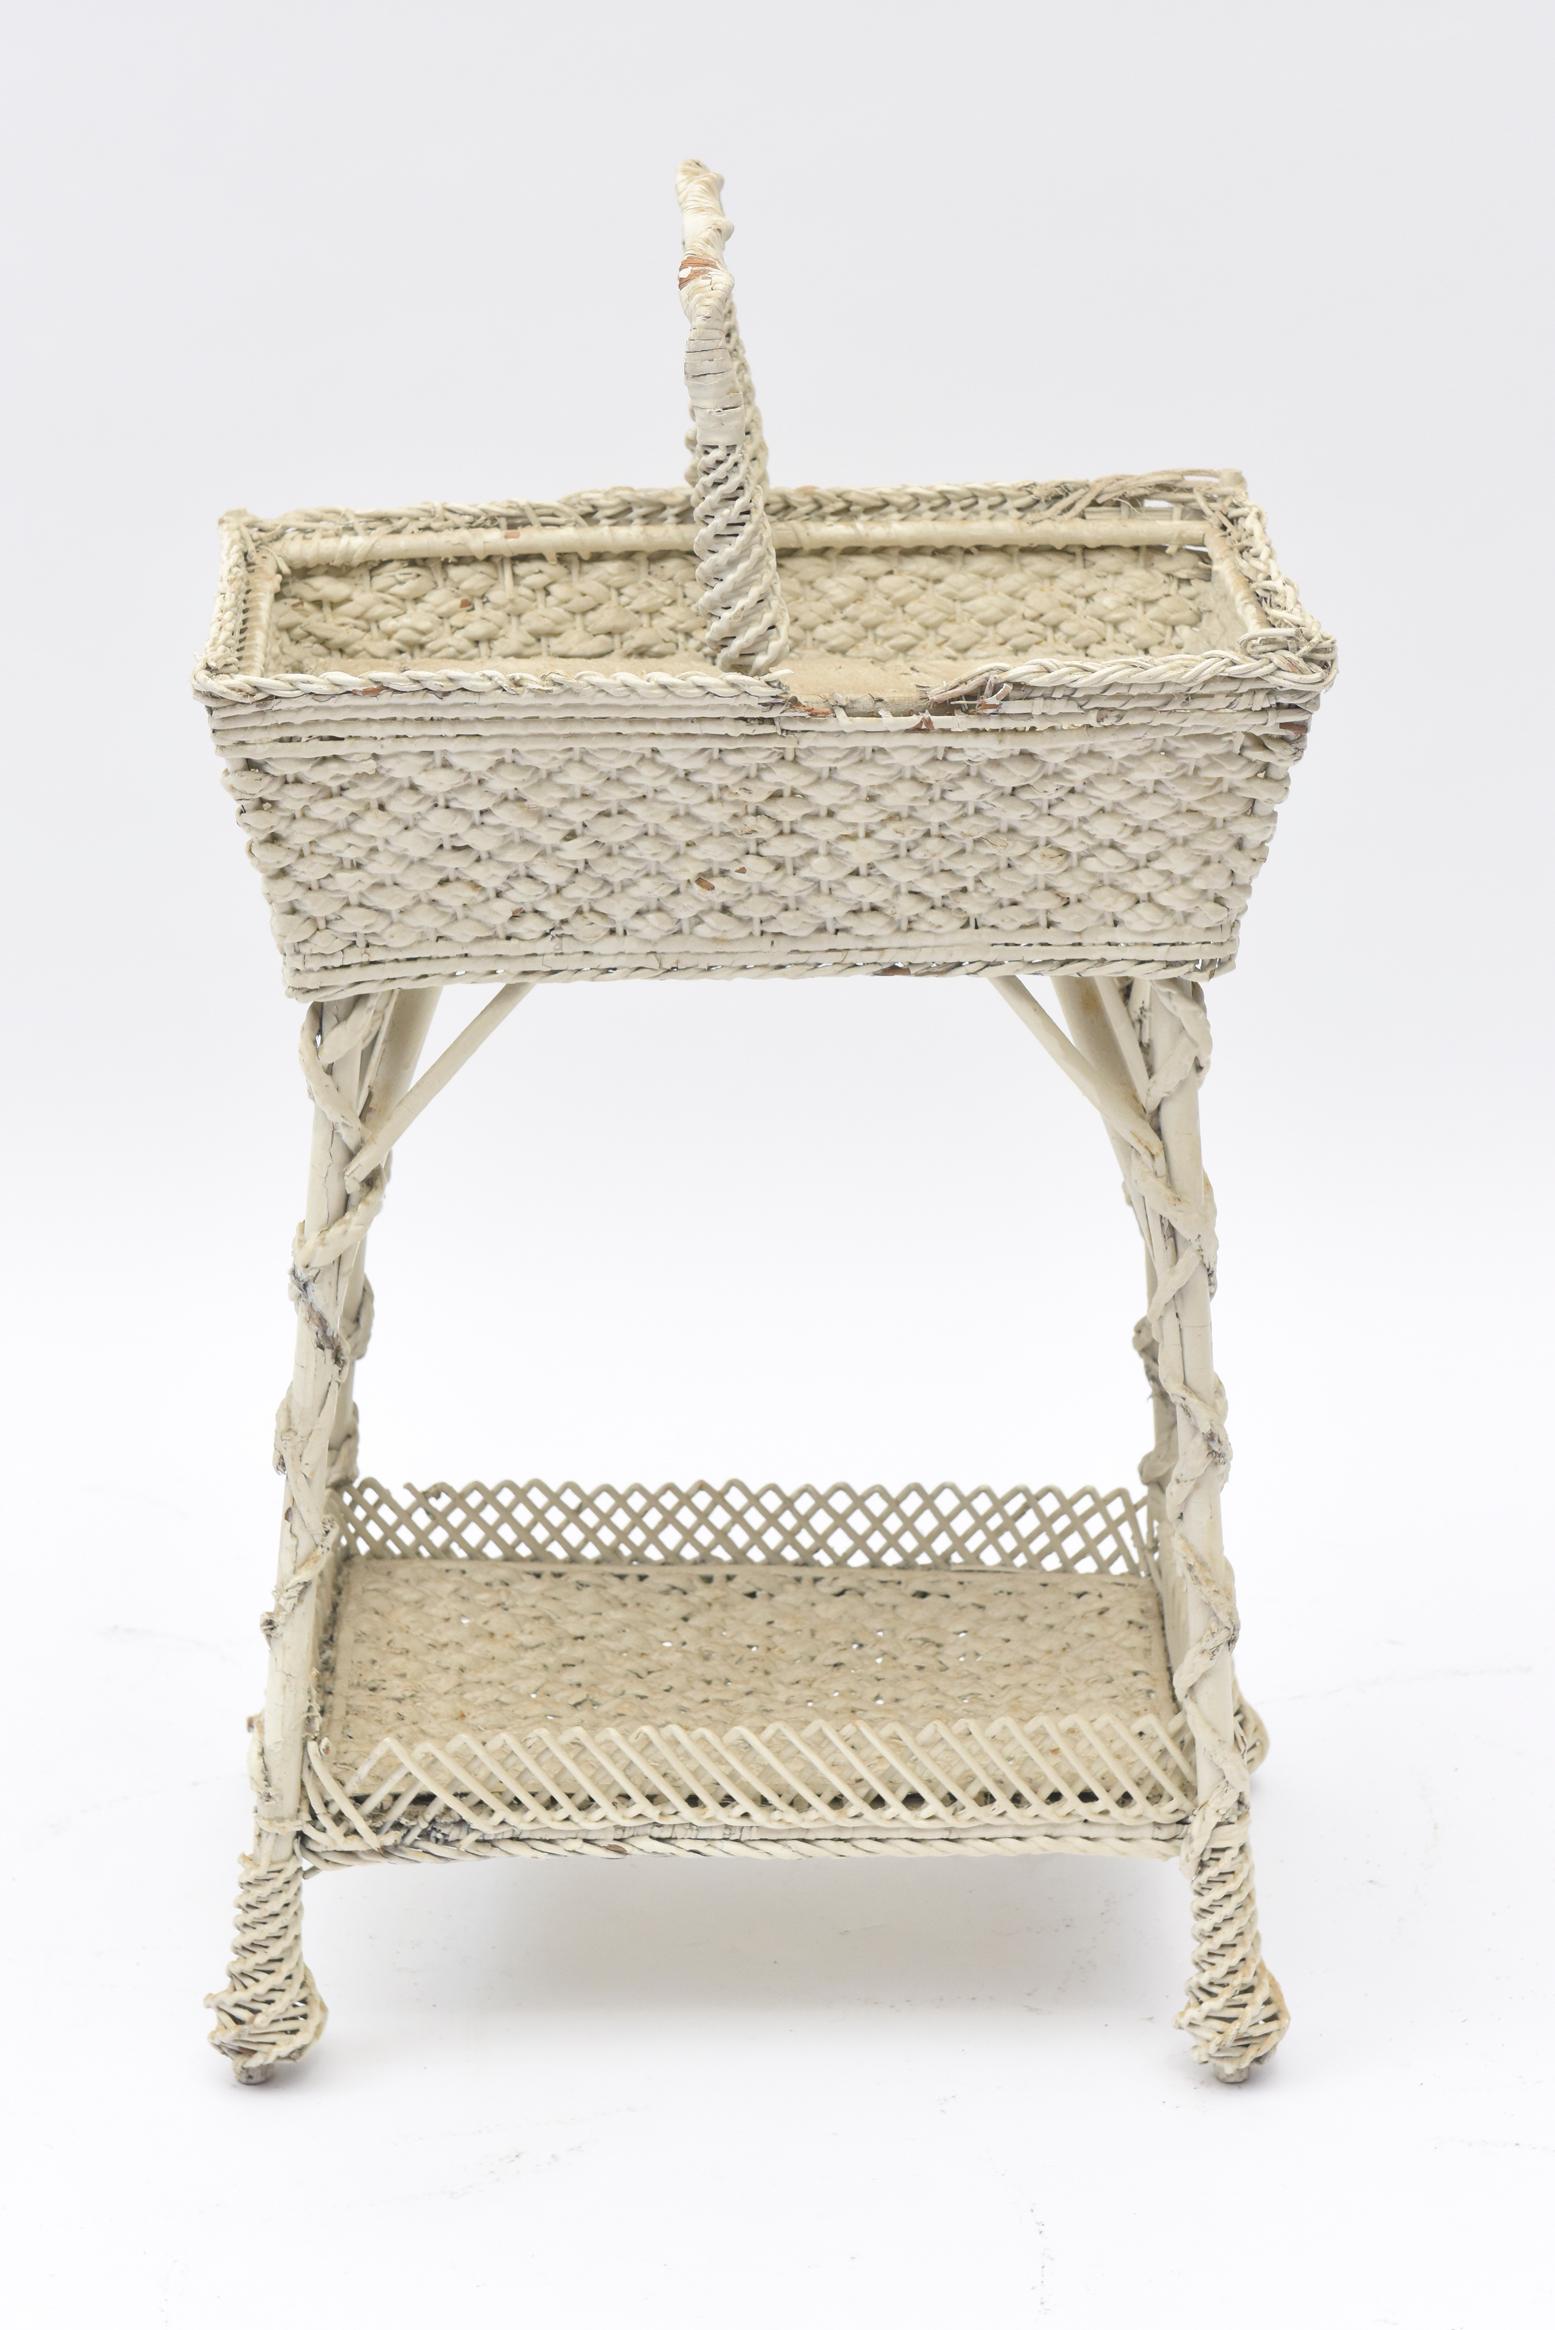 Part of a large collection of ornate wicker that was collected over the years by a Senator's wife. Early 20th century, the open sewing basket has a woven lattice gallery bottom shelf and woven wicker with twisted wicker encircling the legs as they